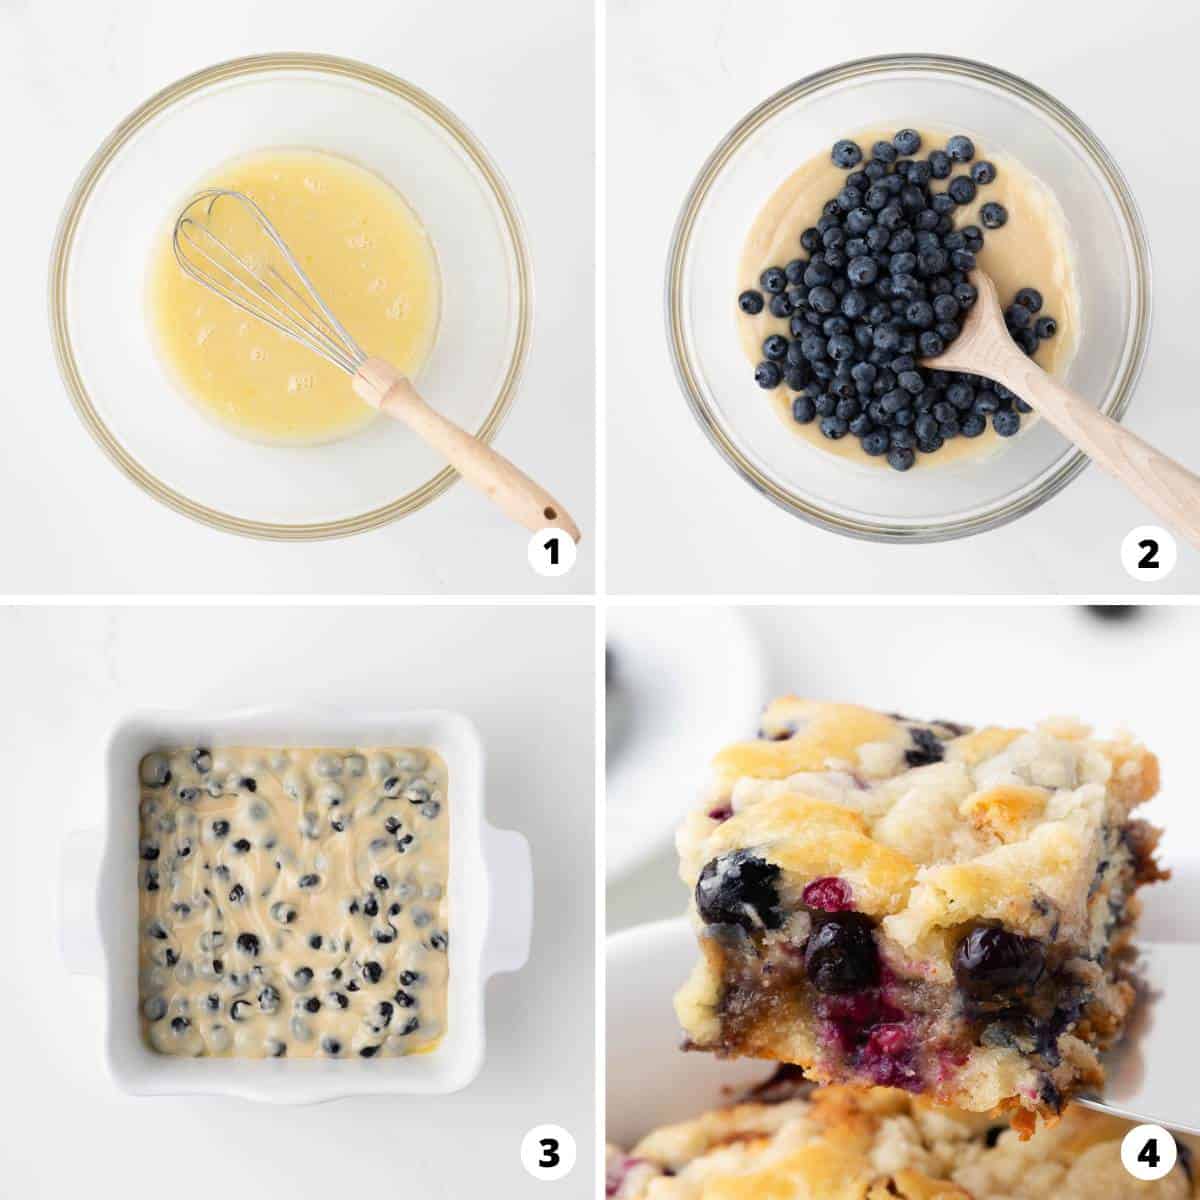 Showing how to make blueberry coffee cake in a 4 step collage.